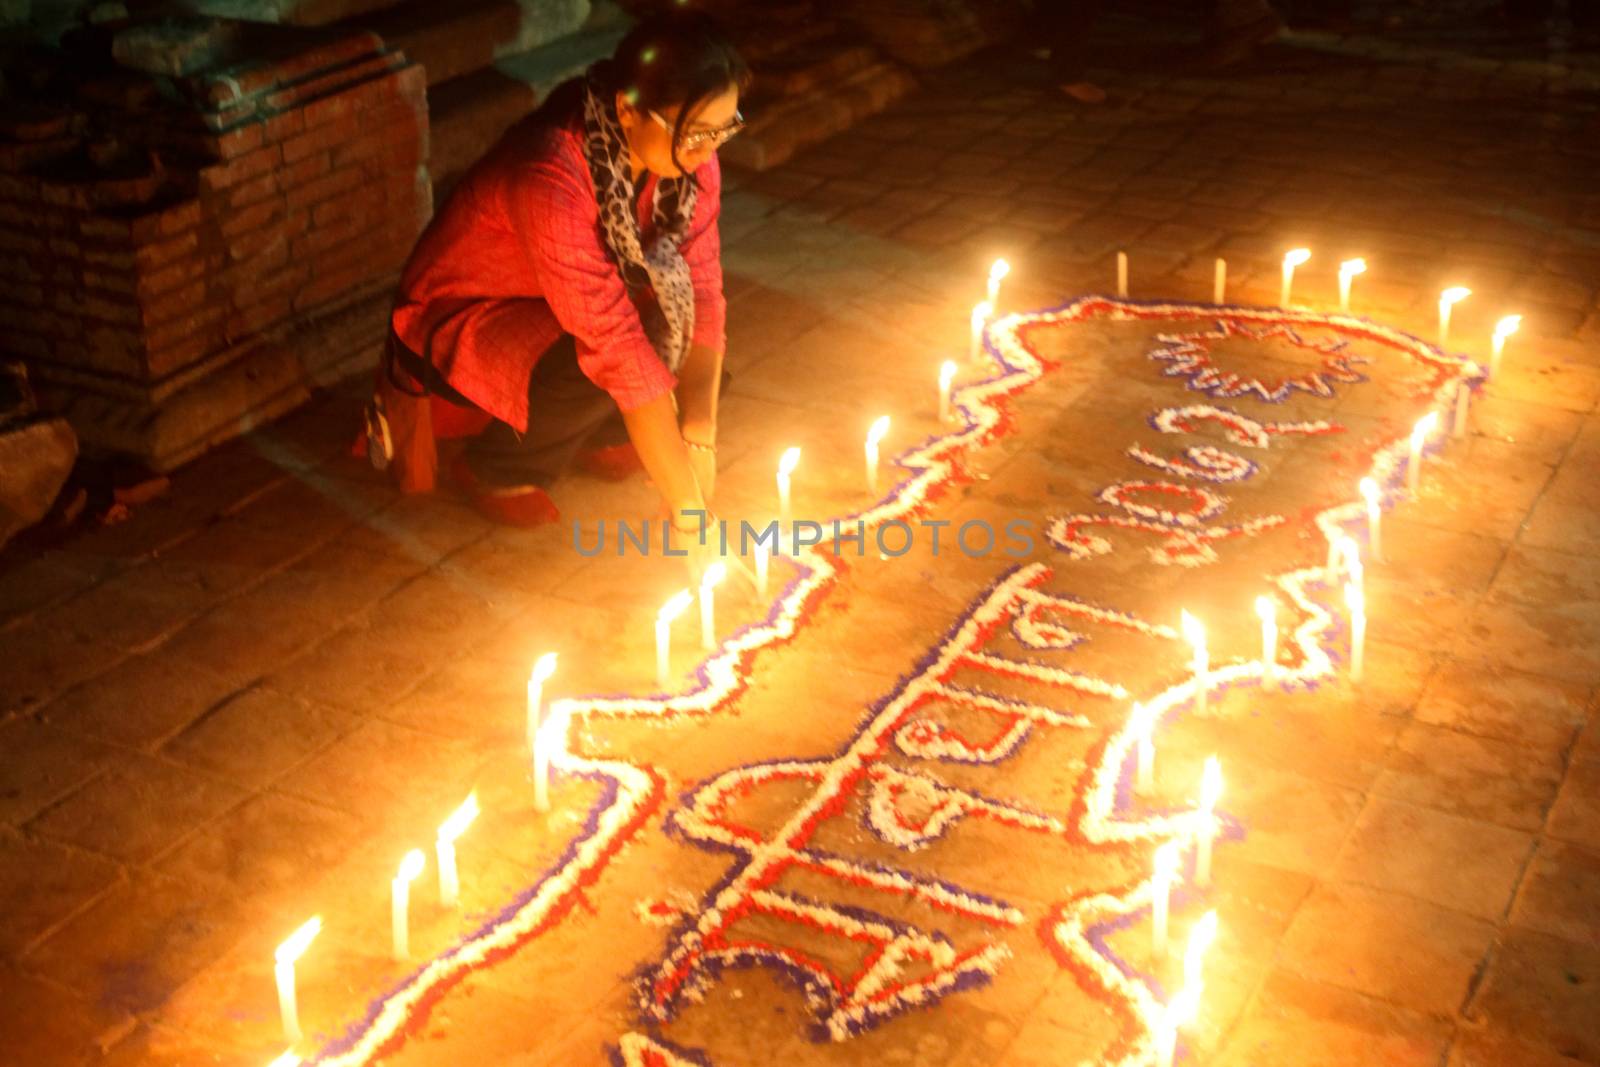 NEPAL, Kathmandu: A woman lights candles at a celebration in Kathmandu, Nepal on September 21, 2015, one day after the government unveiled the country's first democratic constitution in a historic step. Out of the 598 members of the Constituent Assembly, 507 voted for the new constitution, 25 voted against, and 66 abstained in a vote on September 16, 2015. The event was marked with fireworks and festivities, but also with protests organized by parties of the Tharu and Madhesi ethnic communities.Photos taken by Newzulu contributor Dinesh Shrestha show the Nepalese people lighting candles to mark new chapter in the history of their country.